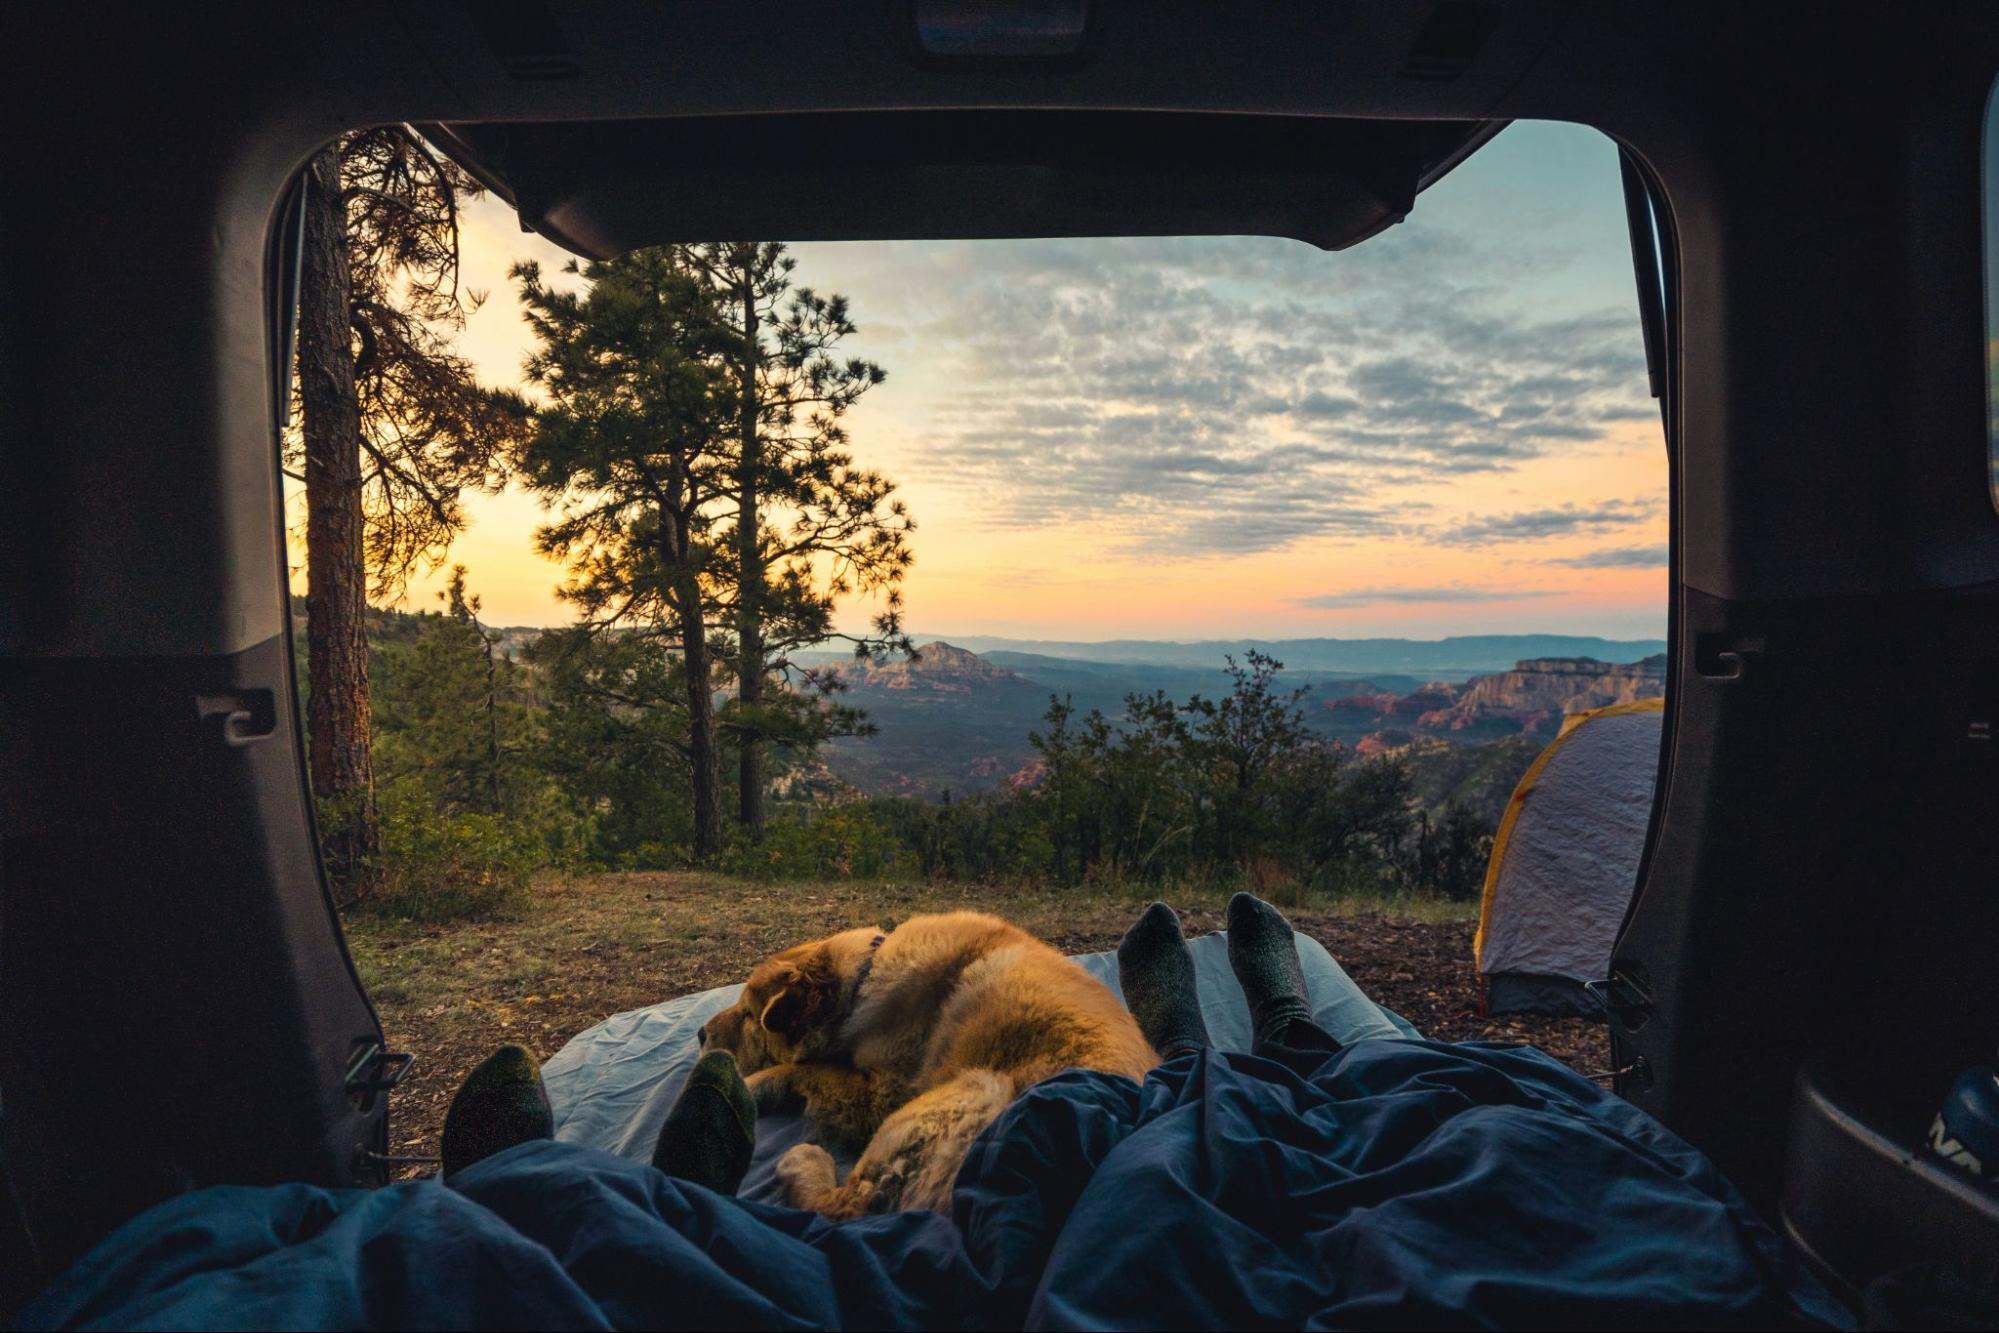 Family camping with the dog